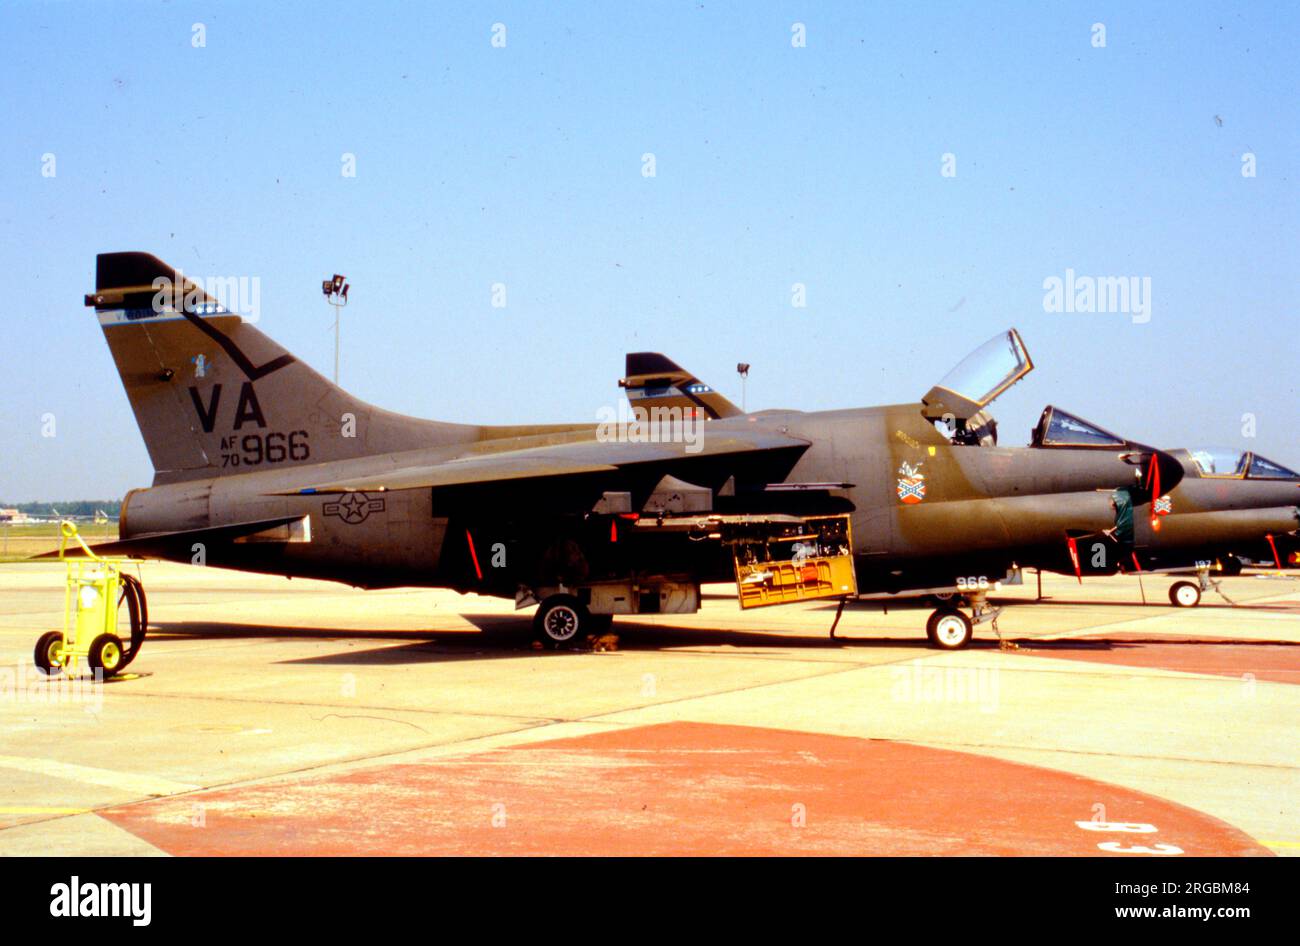 United States Air Force (USAF) - Ling-Temco-Vought A-7D-7-CV Corsair II 70-0966 (msn D-112), of the 149th Tactical Fighter Squadron, Virginia Air National Guard. Stock Photo